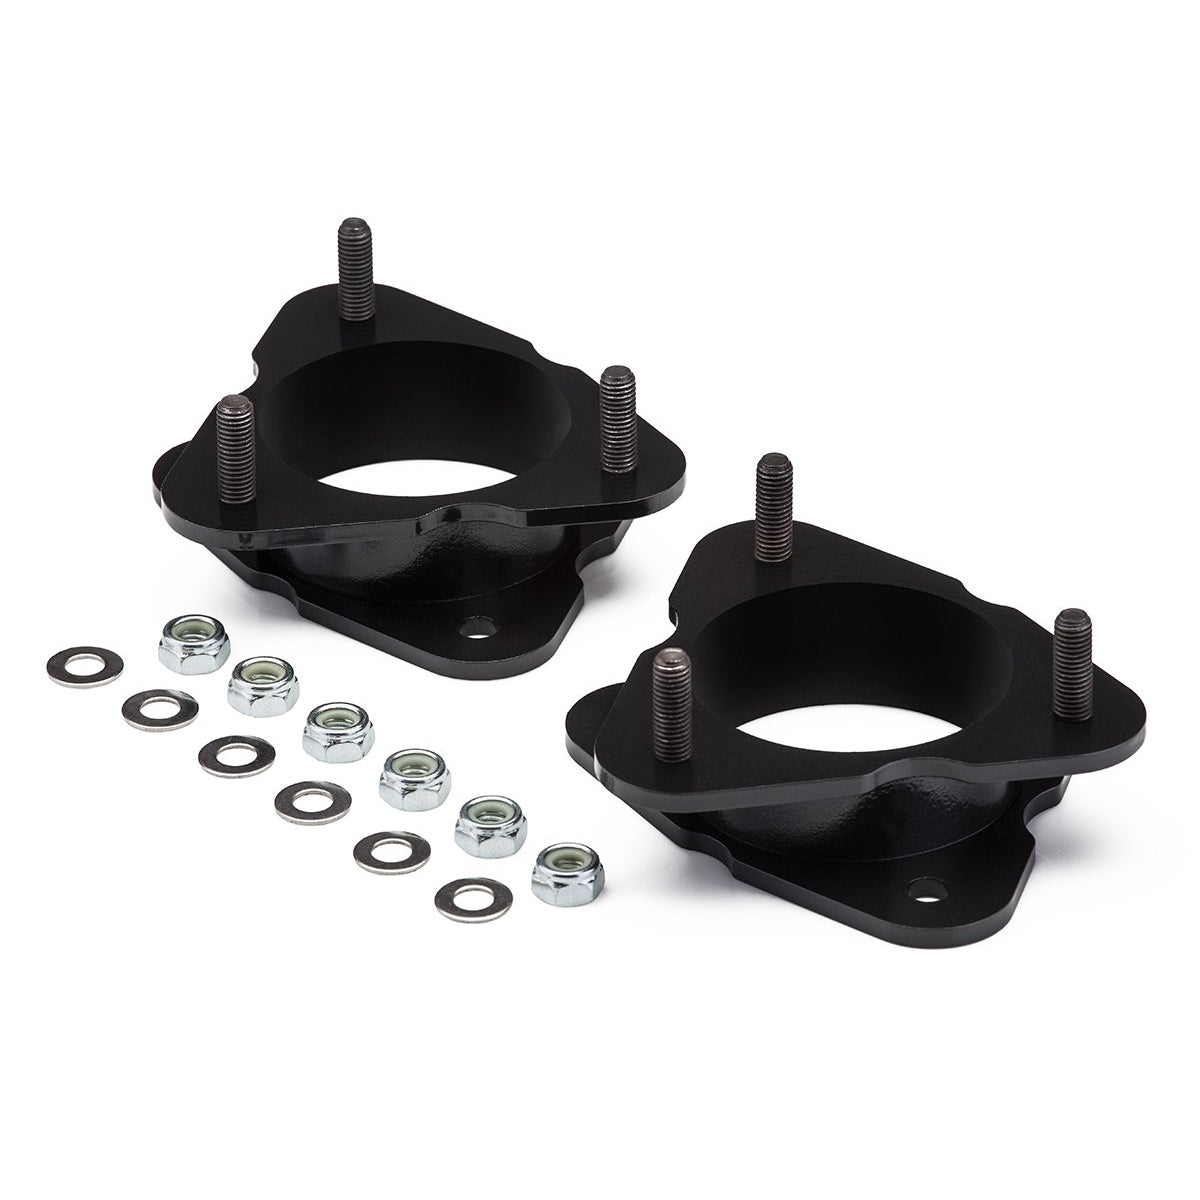 2007-2013 Chevy Avalanche 1500 Front Lift Kit with Bump Stops